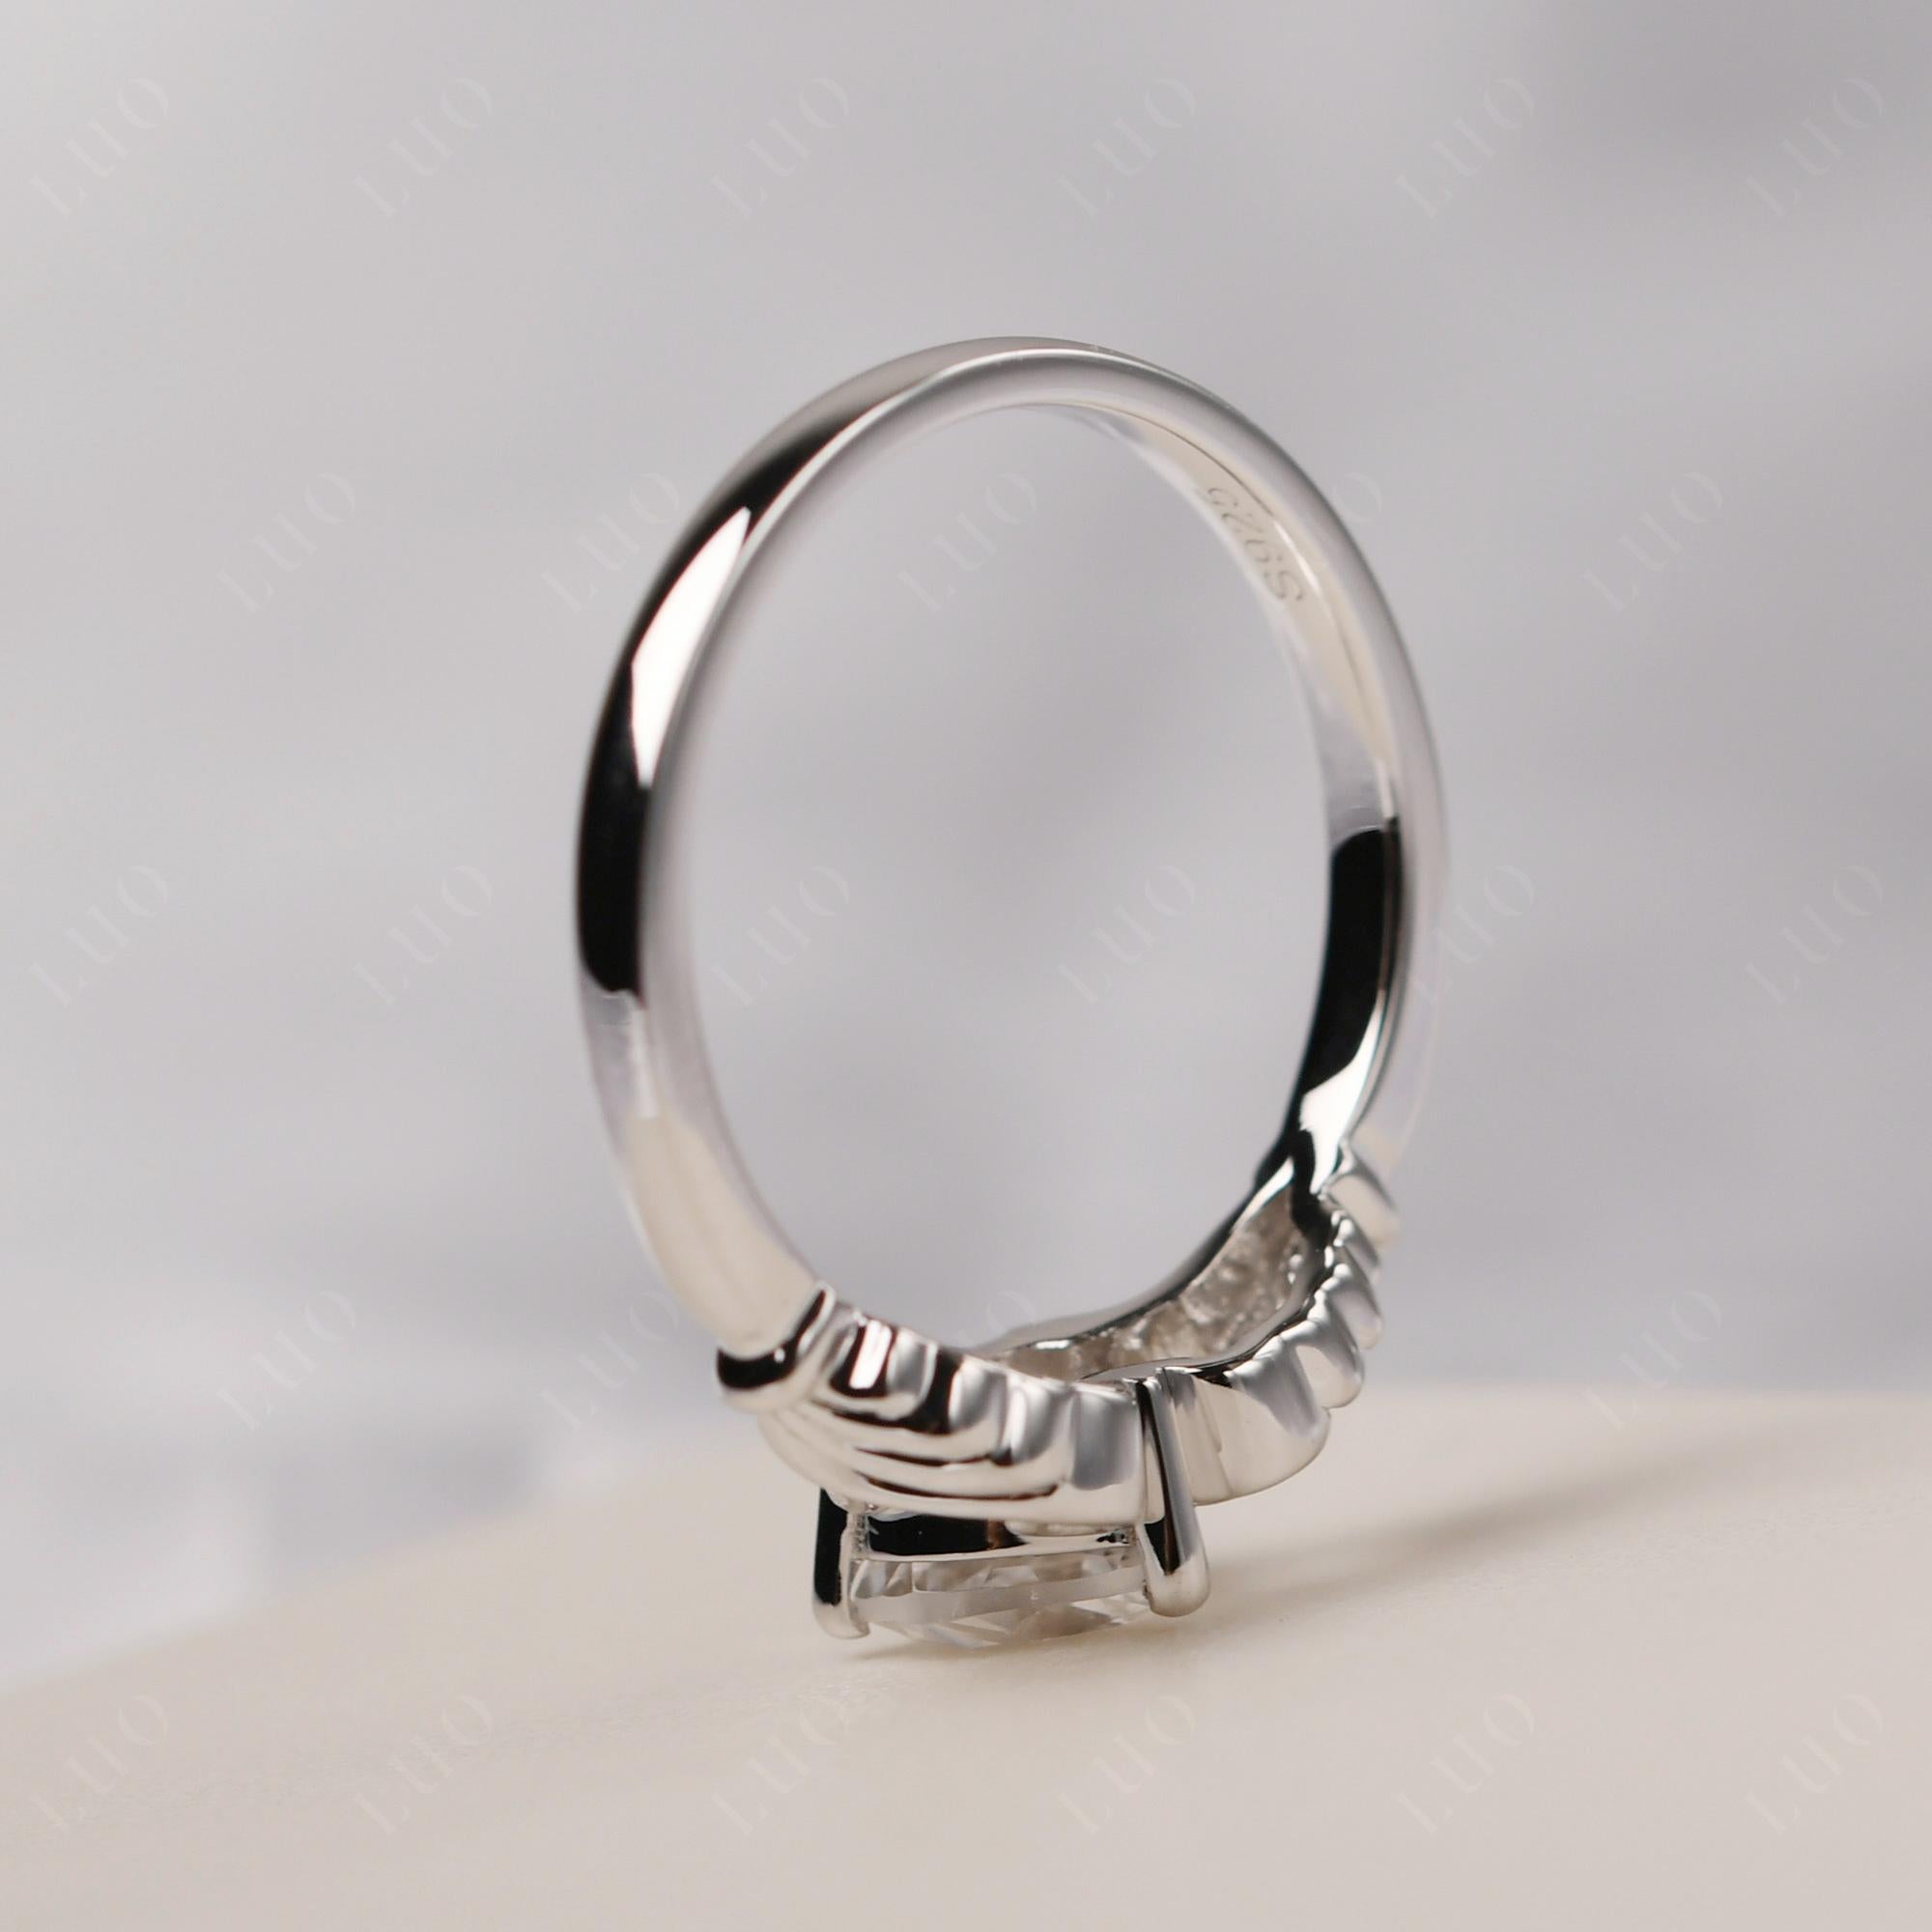 Heart Shaped White Topaz Claddagh Ring - LUO Jewelry